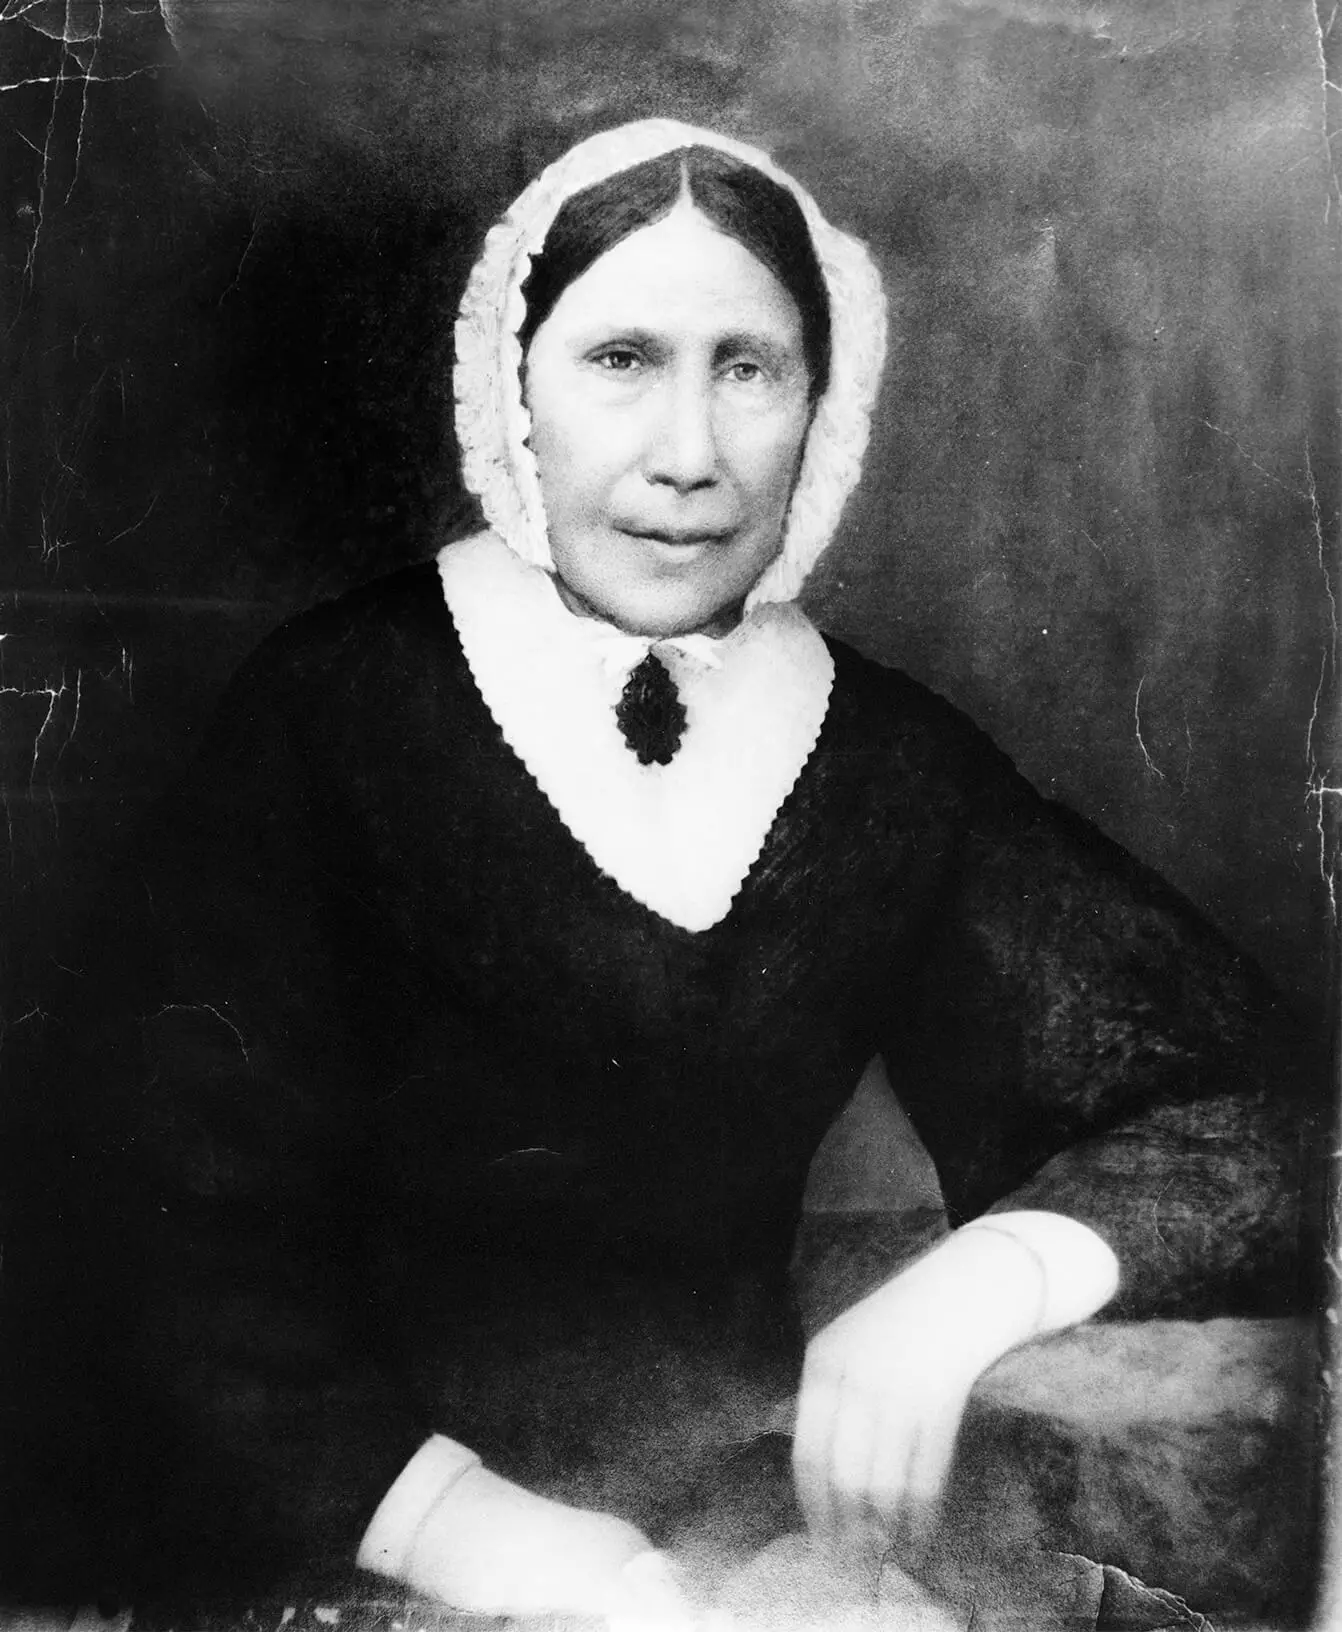 Portrait of a middle-aged light-skinned woman with dark hair, wearing a white bonnet and black dress.